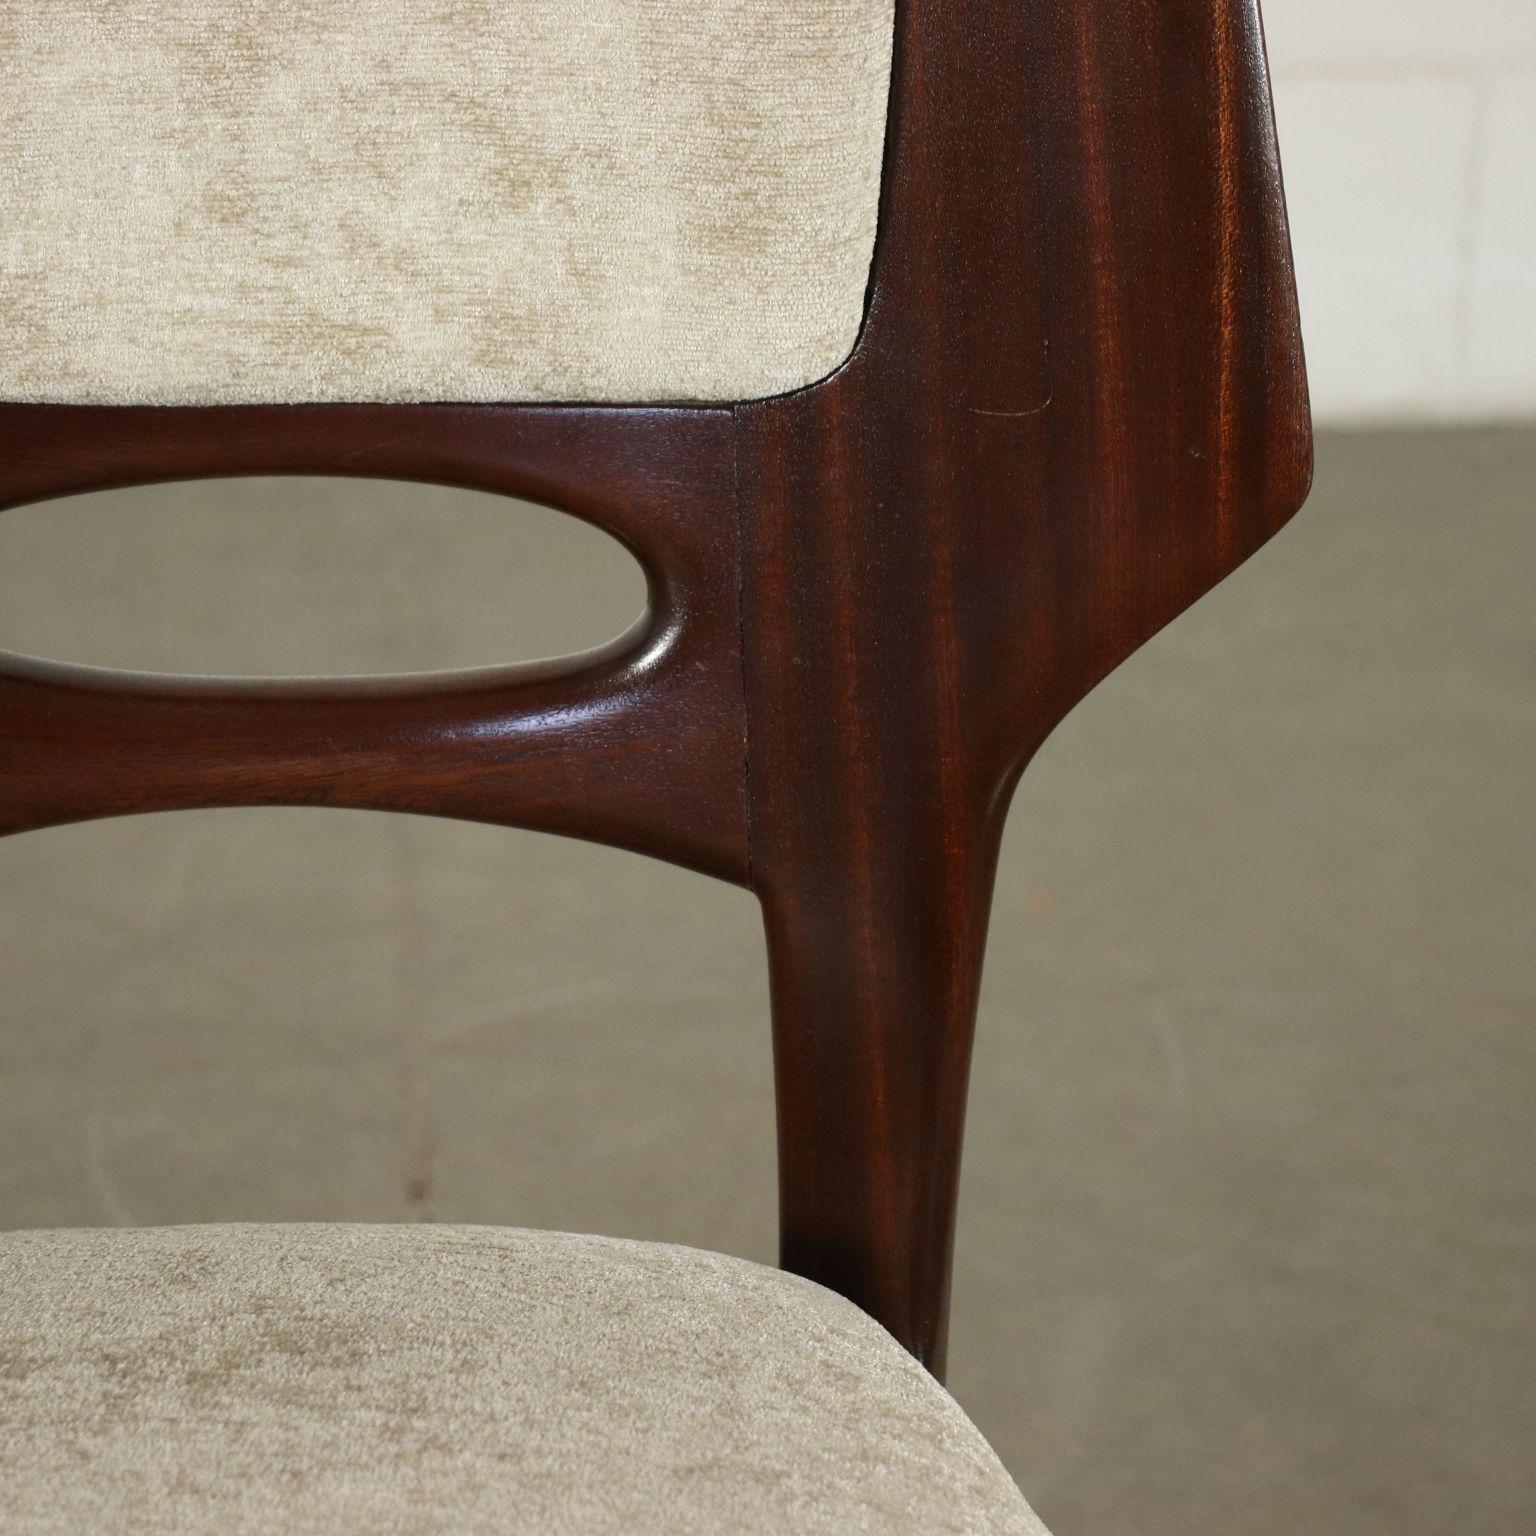 Other Group of Six Chairs Mahogany Velvet Foam, Italy, 1950s